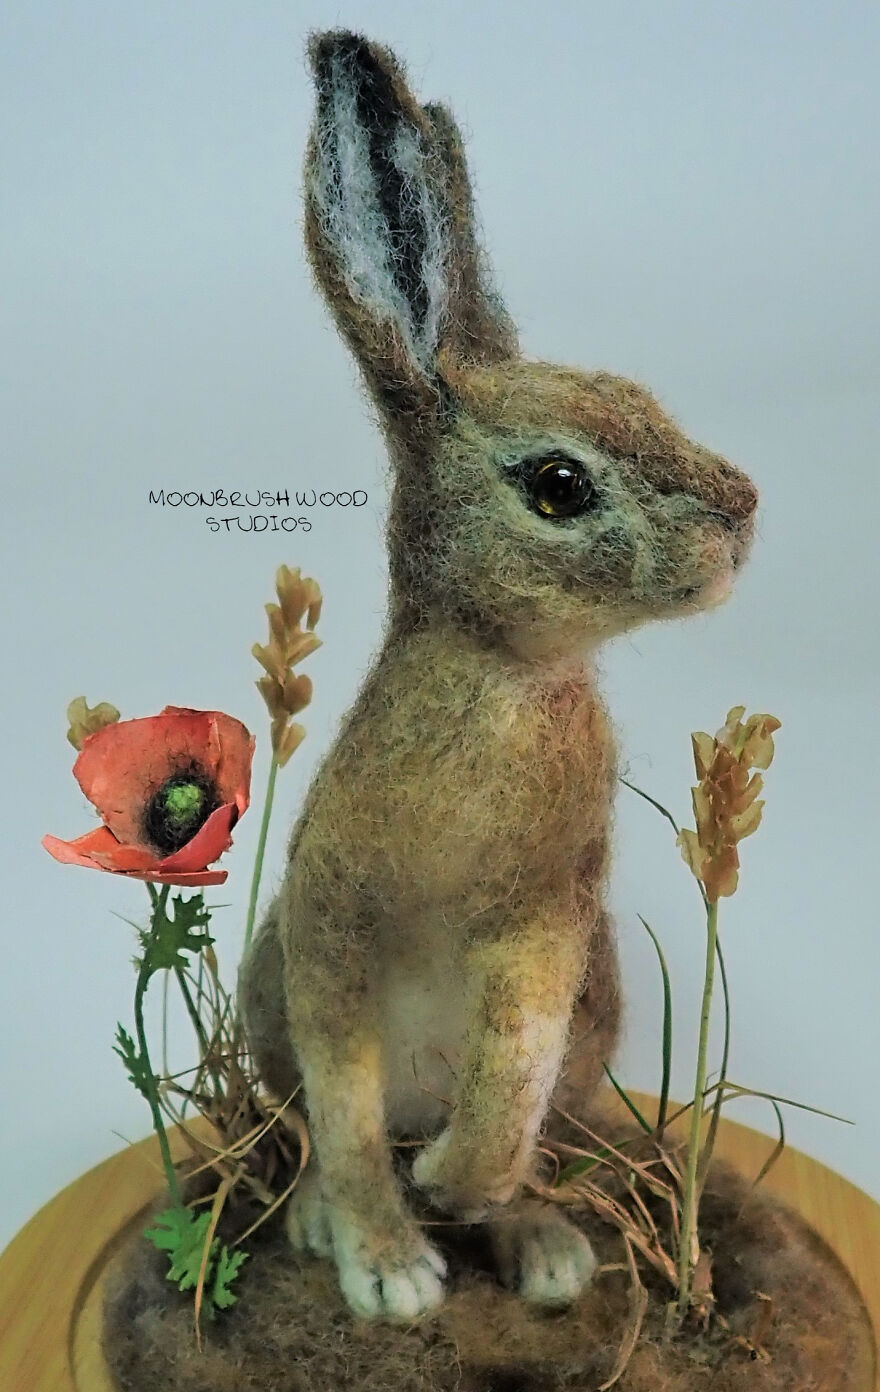 I Created This Mixed Media Sculpture Of A Hare In A Wheat Field